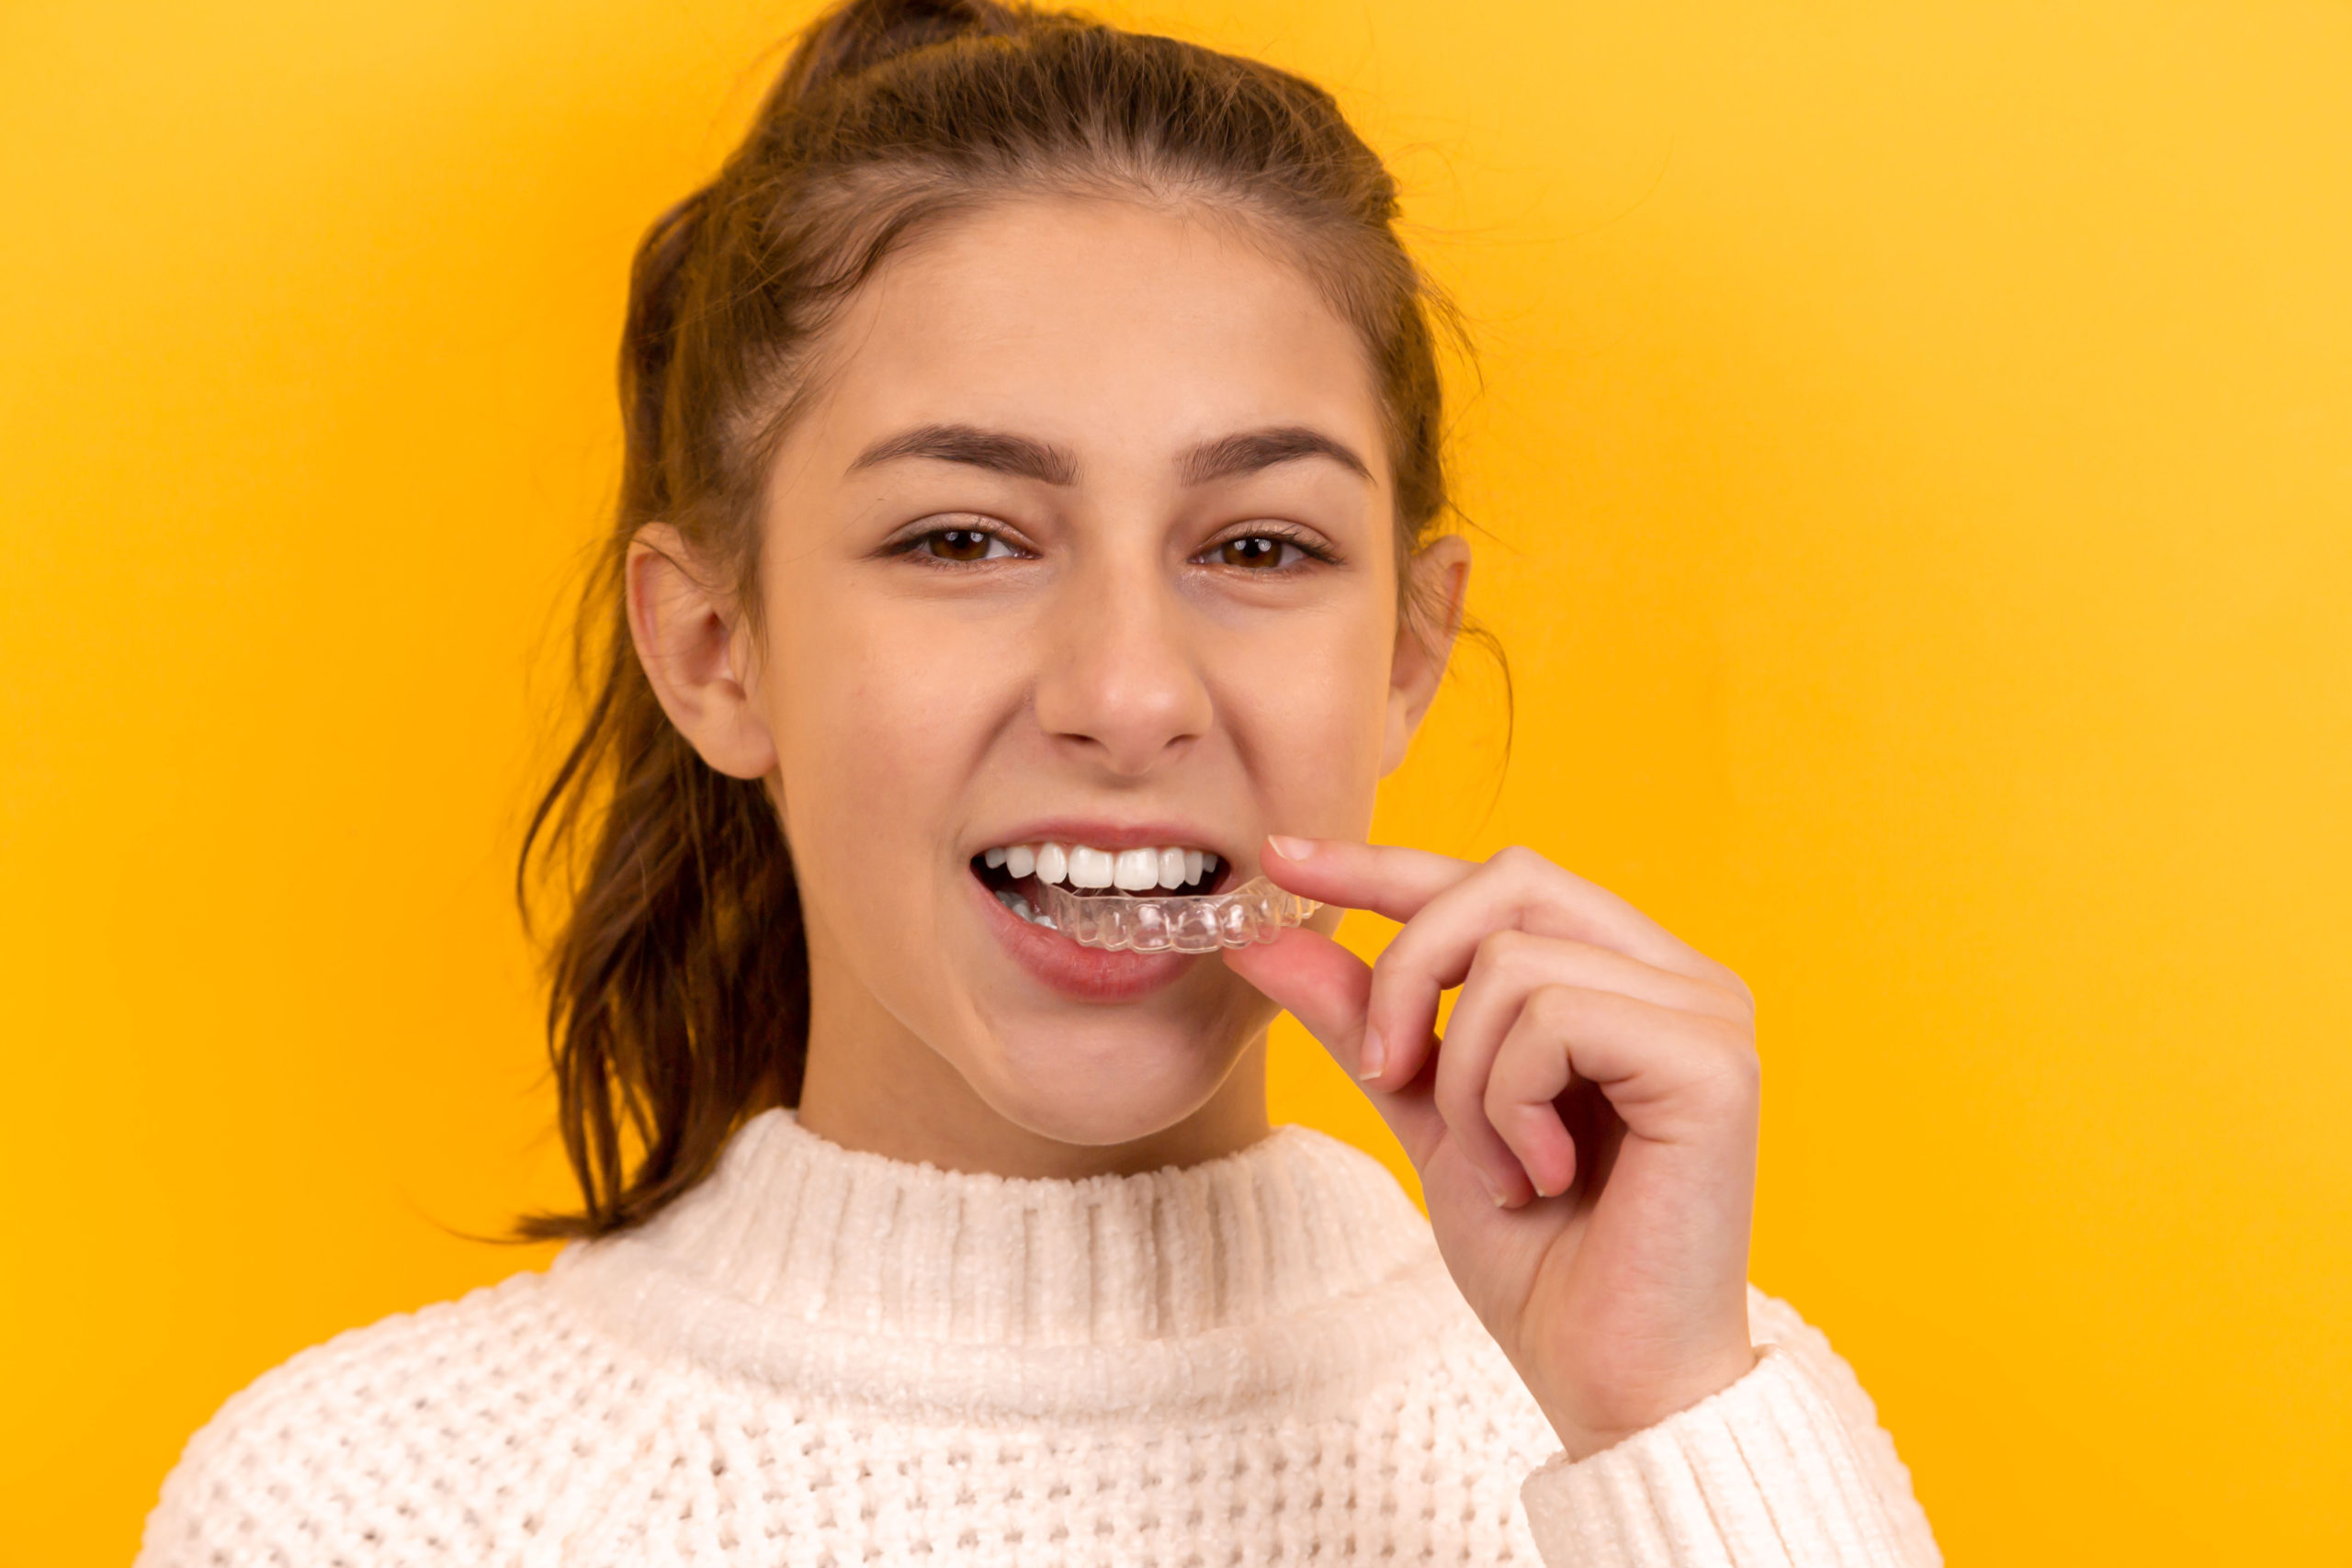 A beautiful girl puts a dental retainer on her teeth, she stands on a yellow background